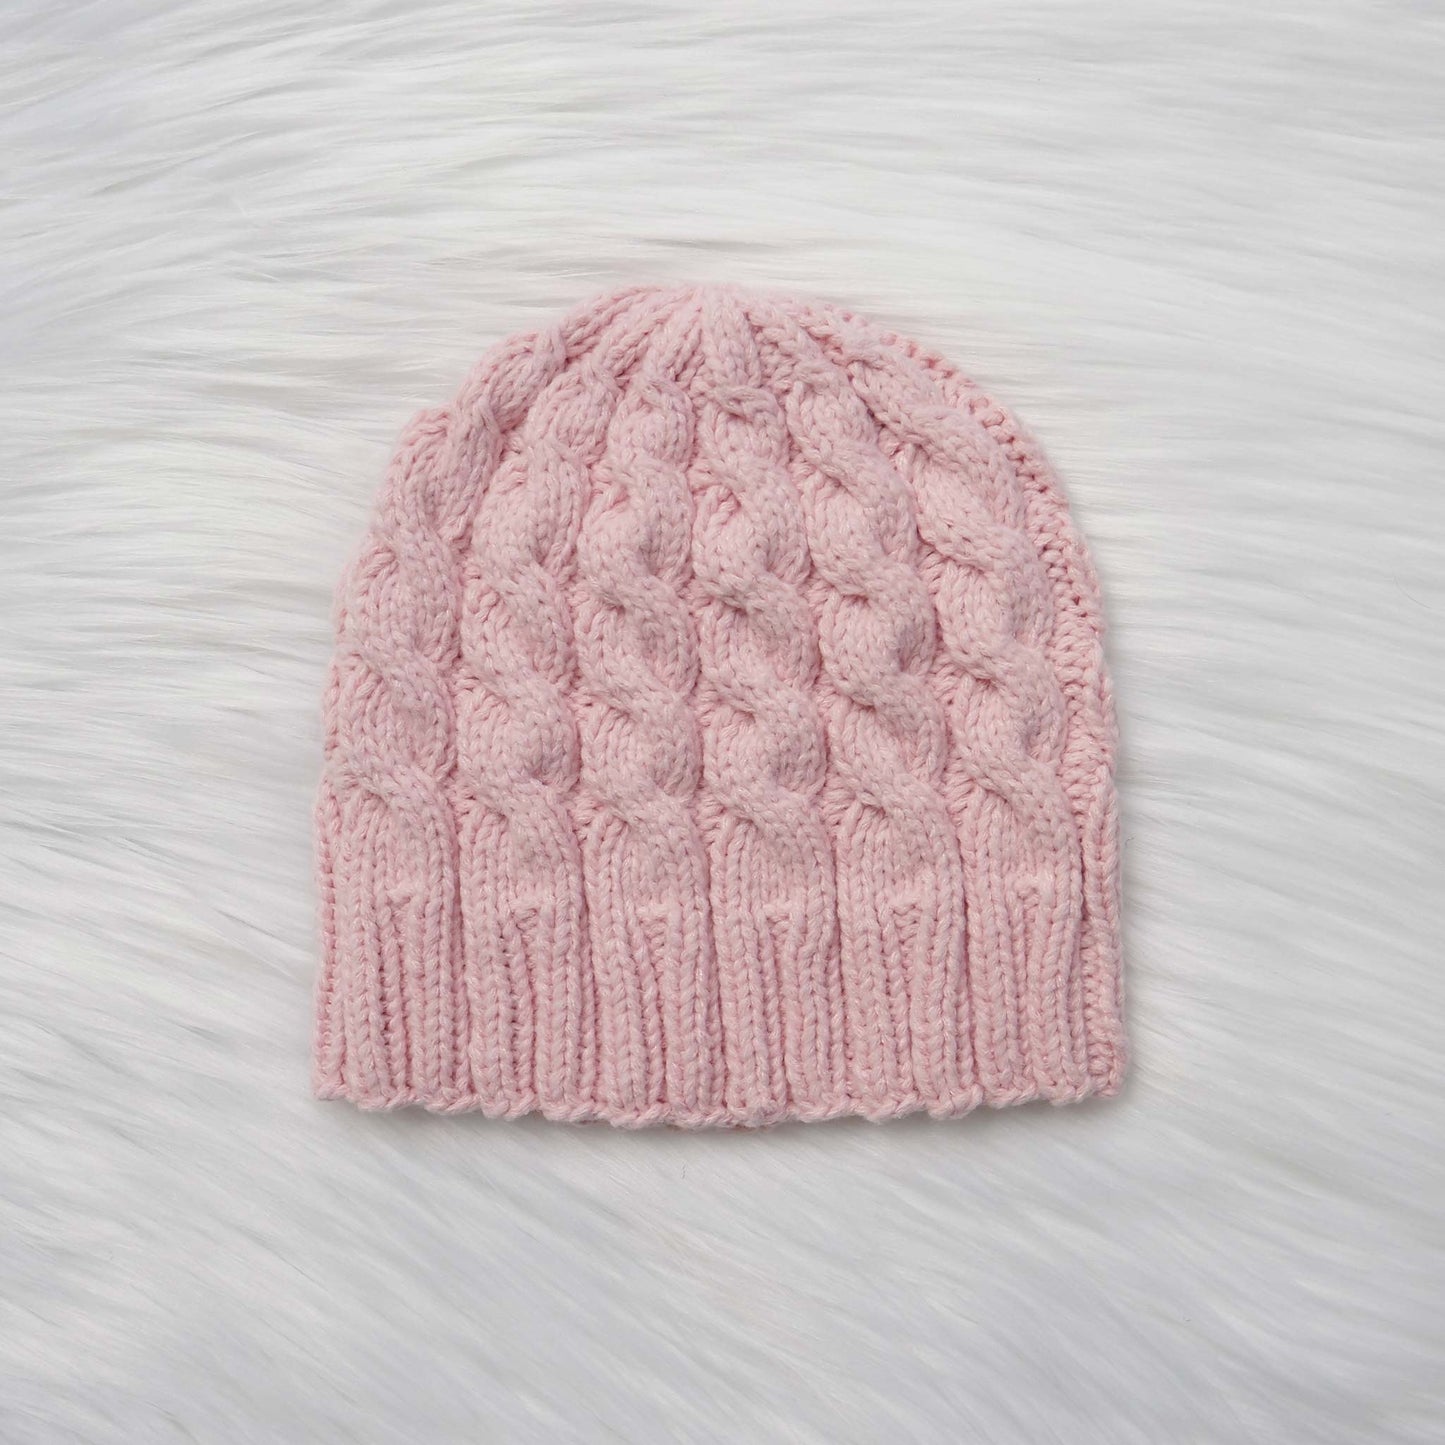 Classic Cable Knit Hat PDF